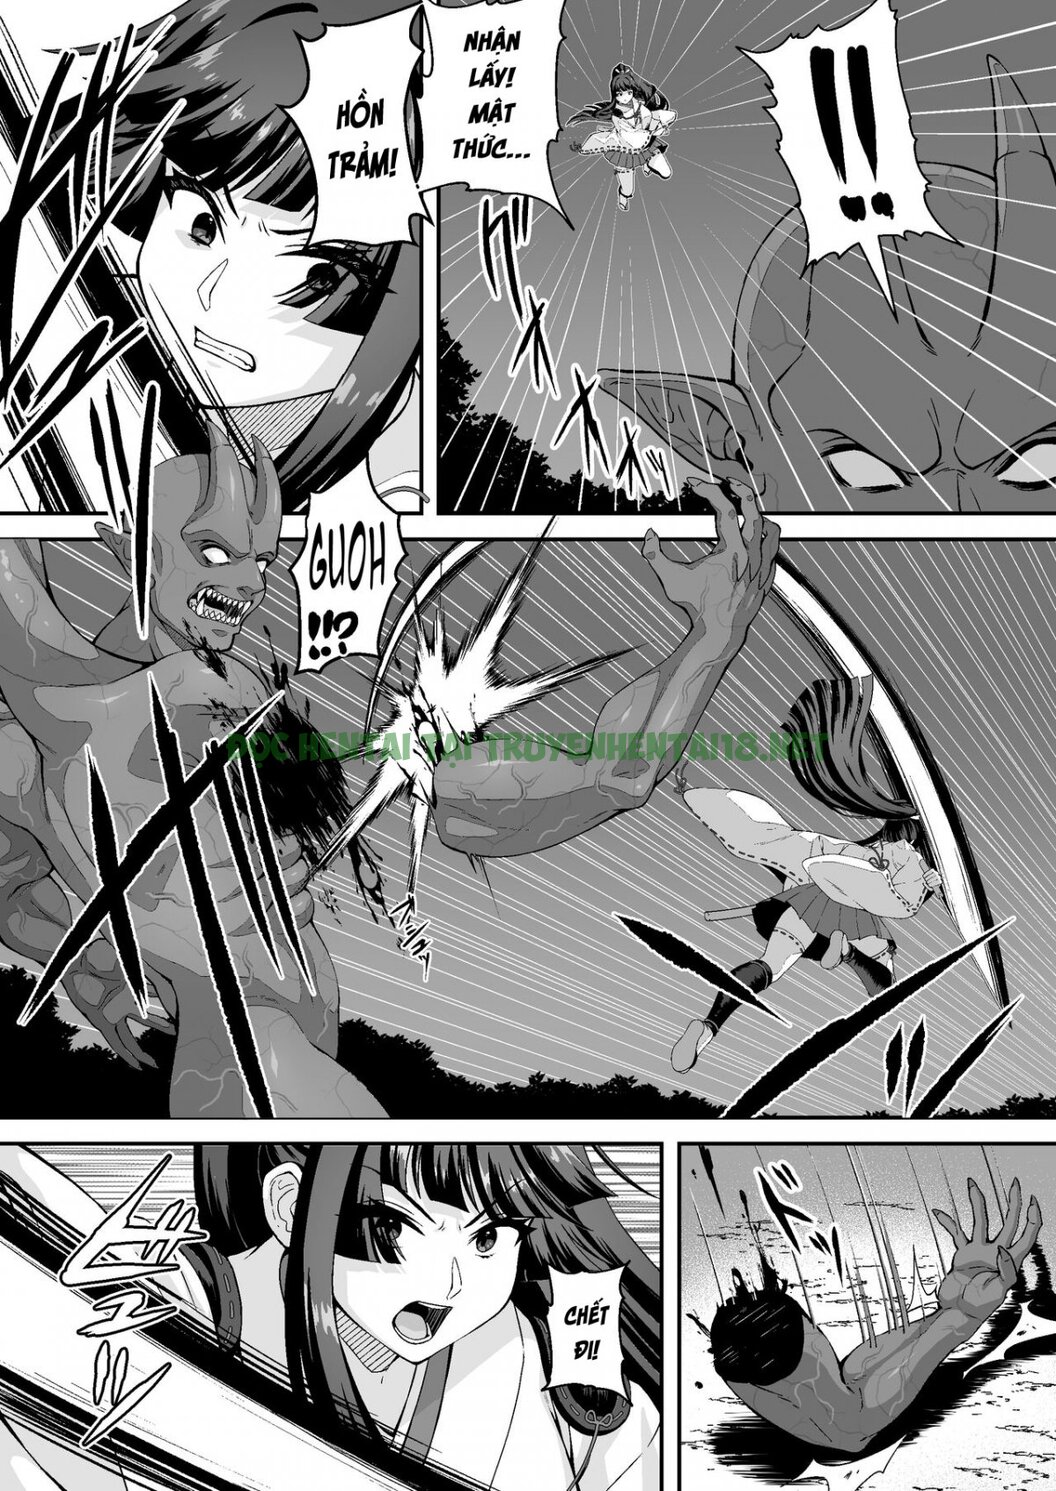 Hình ảnh 15 trong The Master Demon Exorcist Doesn't Succumb To Tentacle Demon - One Shot